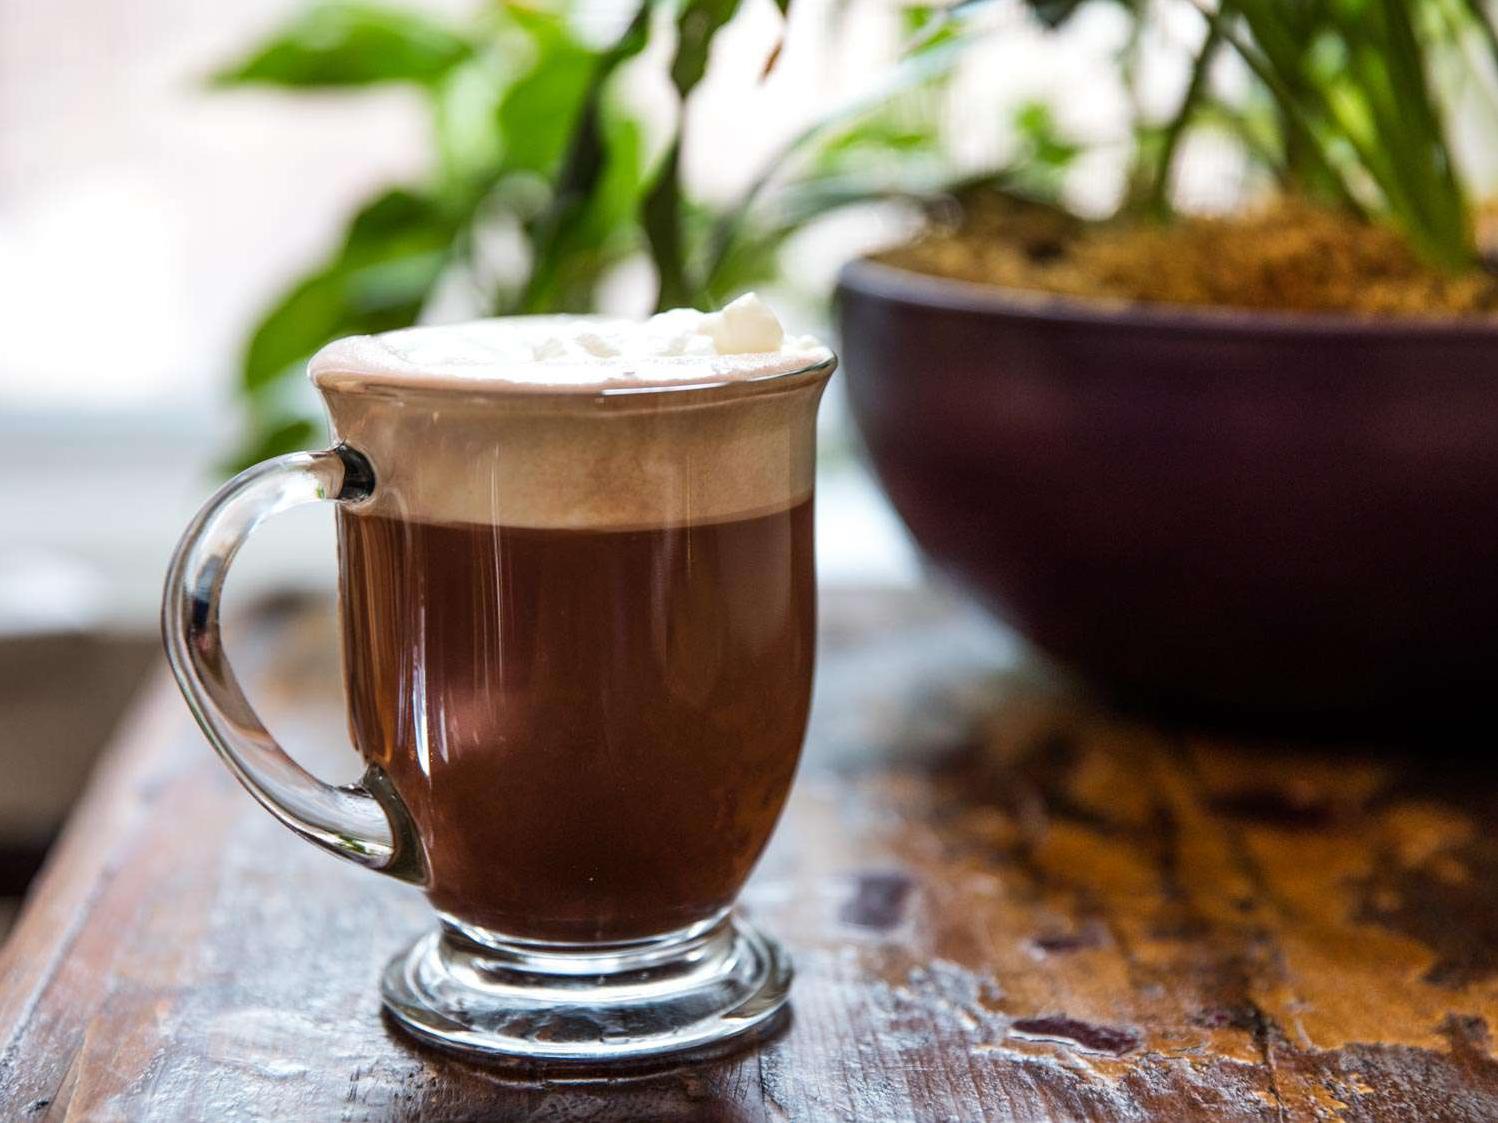  This isn't your average cup of joe – prepare to be blown away by the flavors!